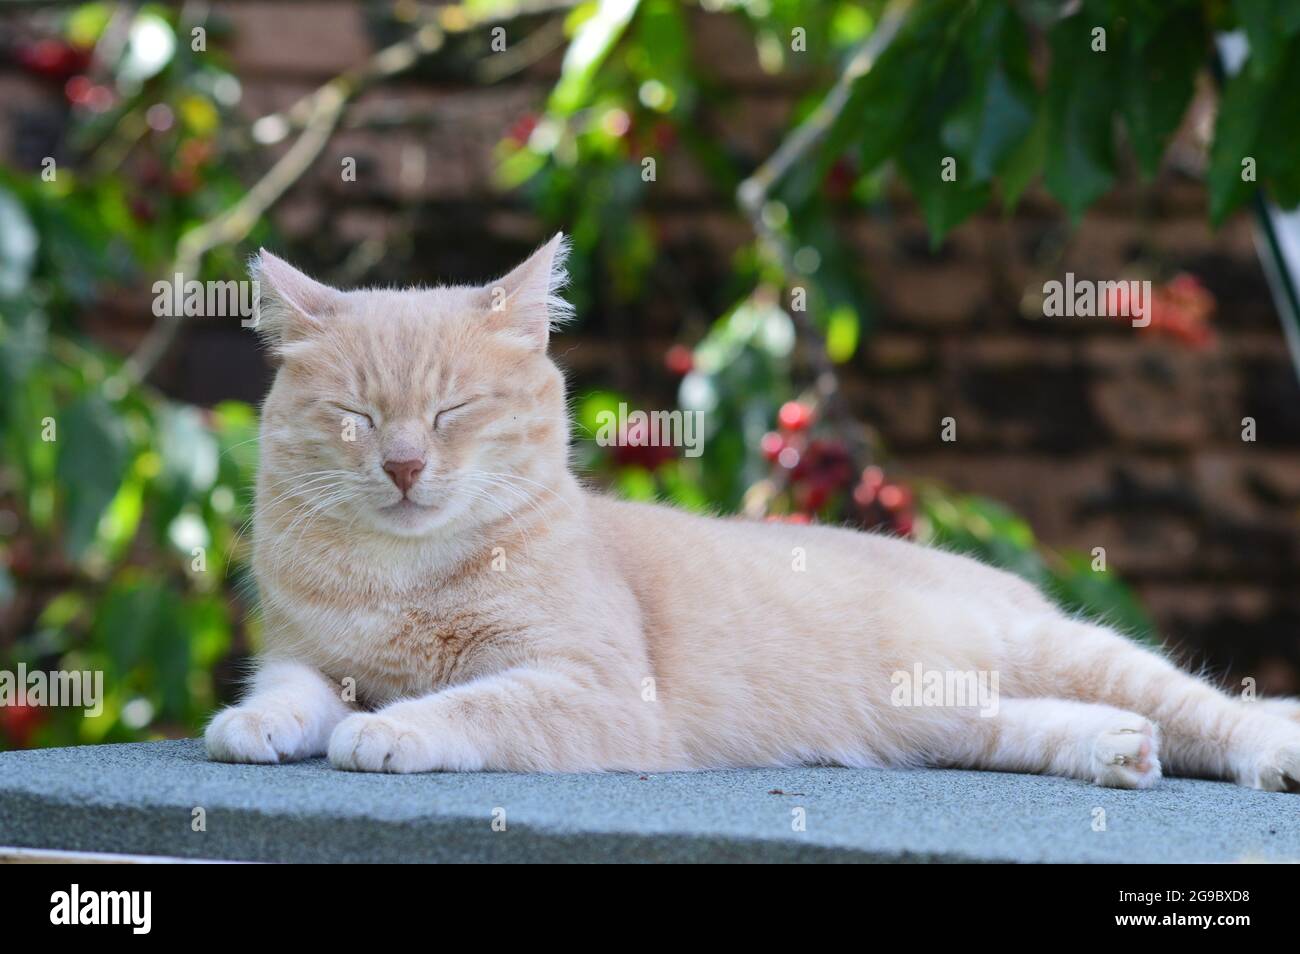 Pretty cream coloured cat napping outdoors in the sun Stock Photo